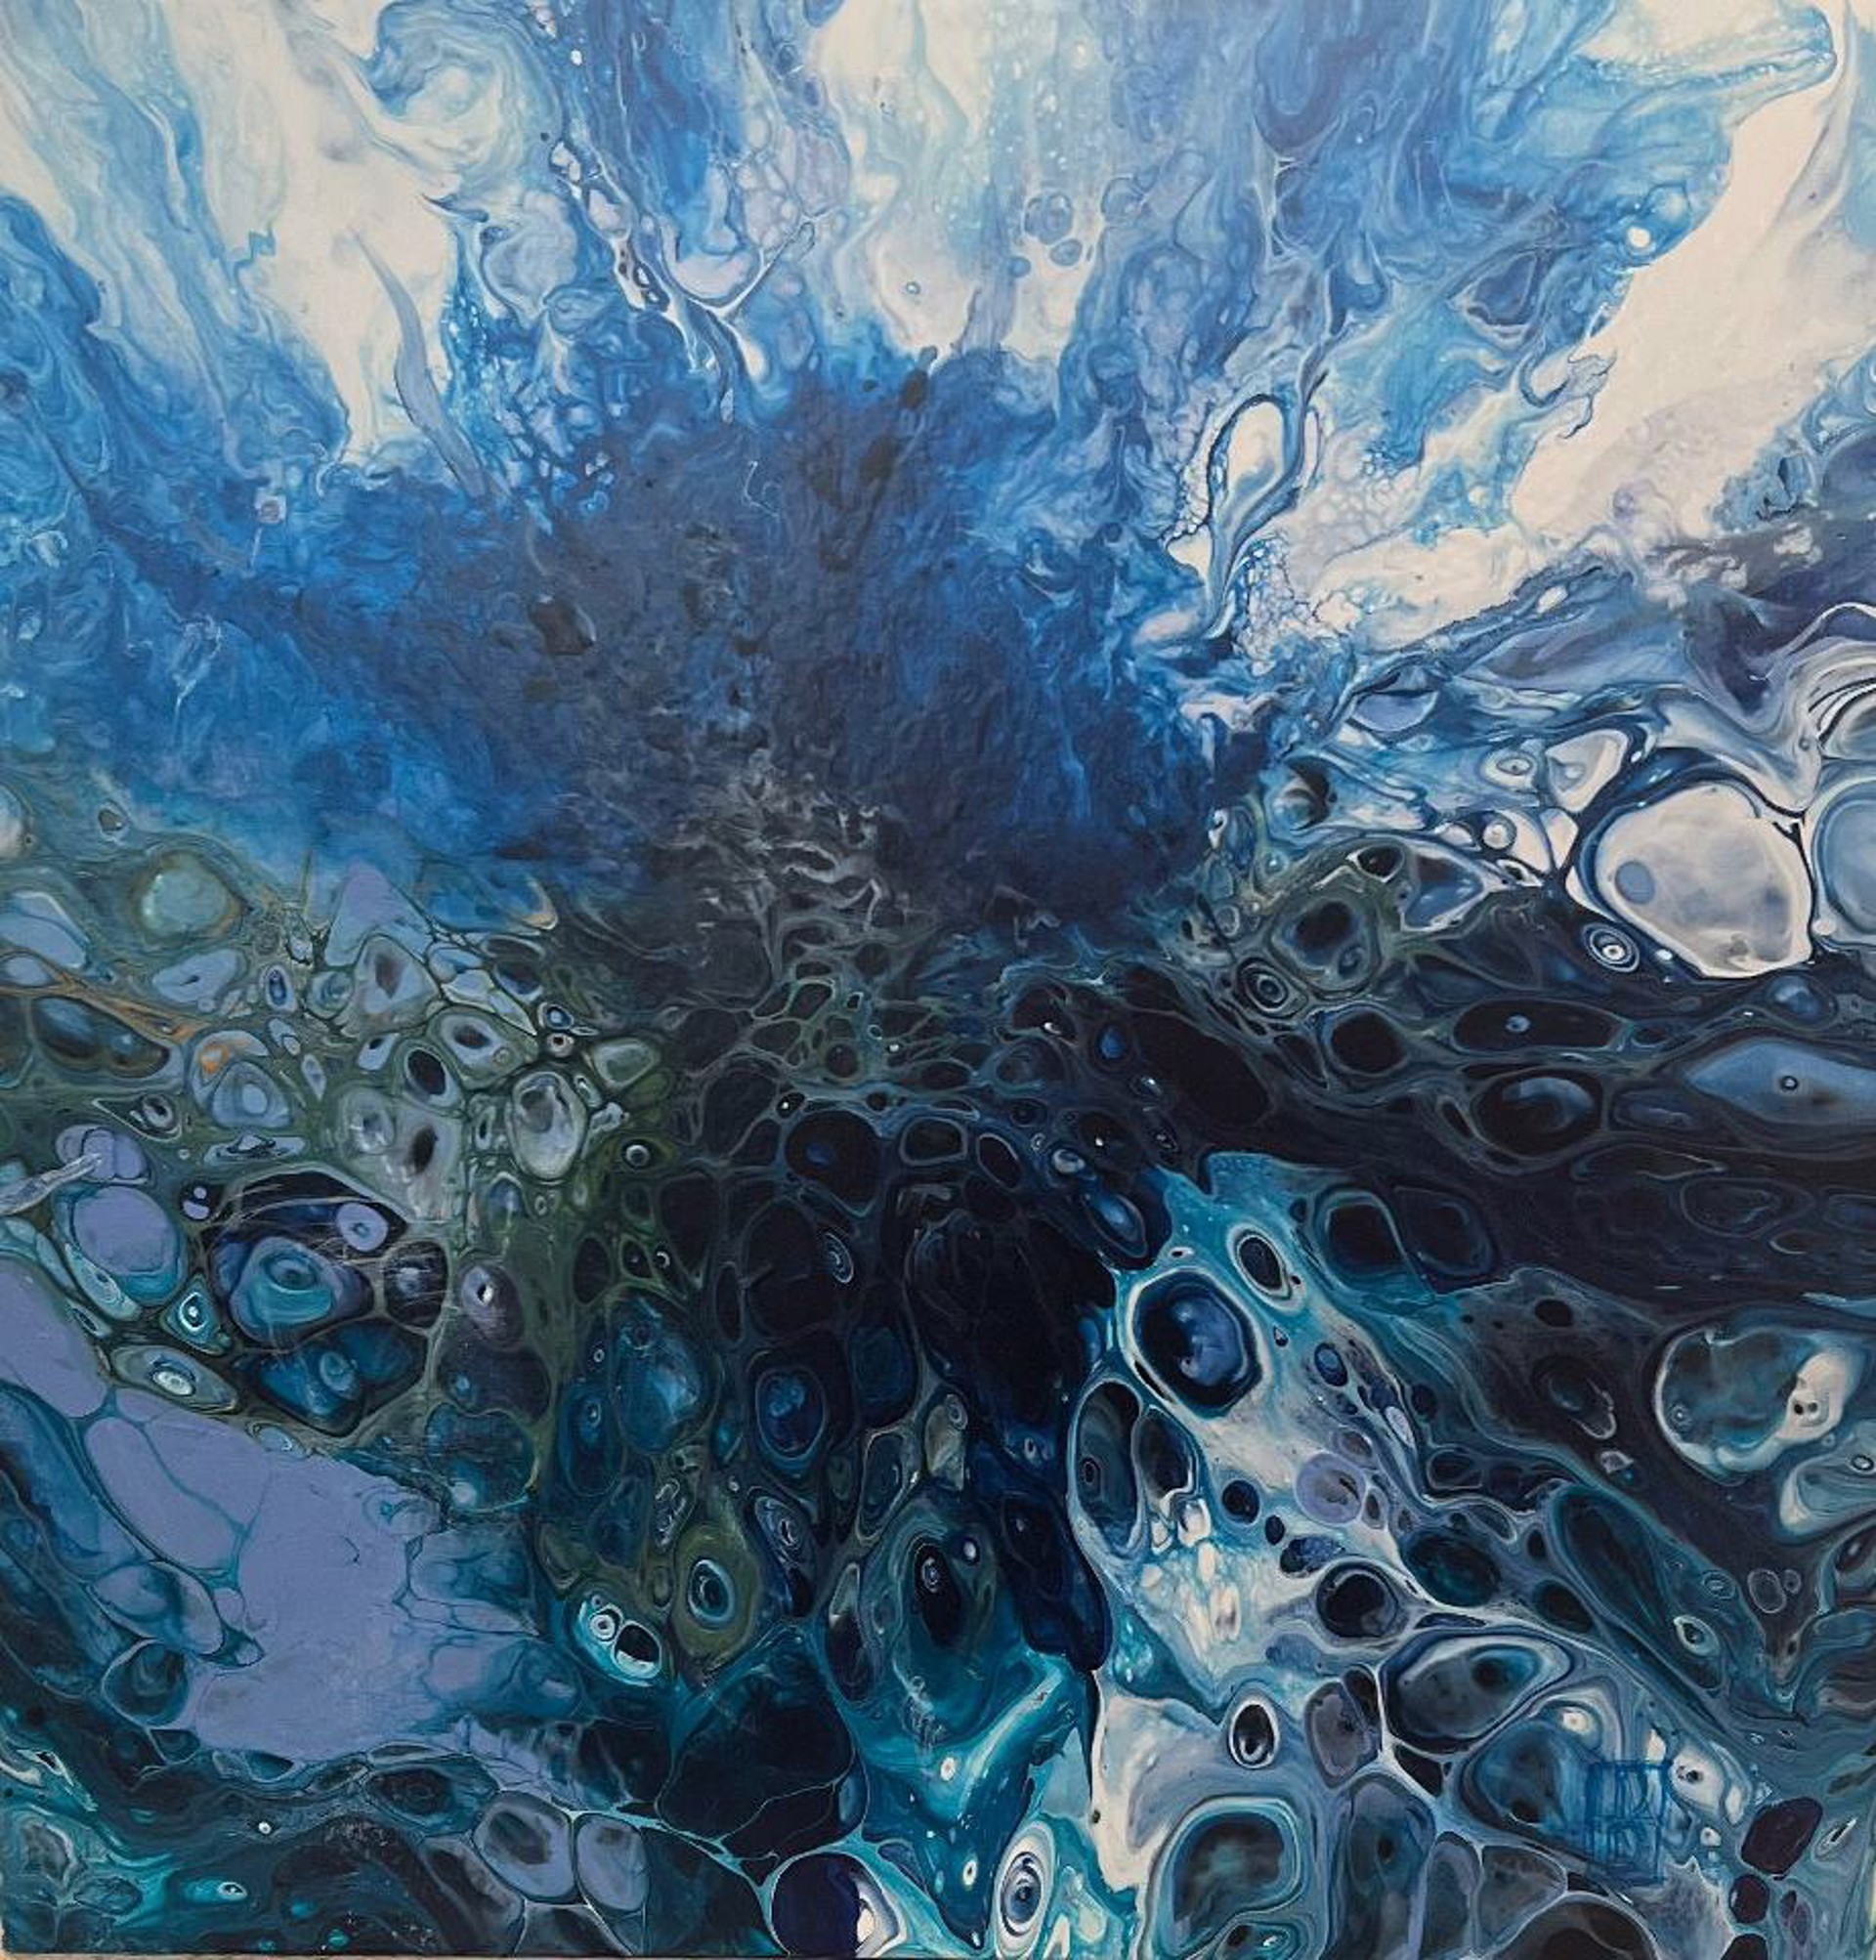 Acrylic Floating Series of 3 - Turquoise Explosion by Debbie Dannheisser